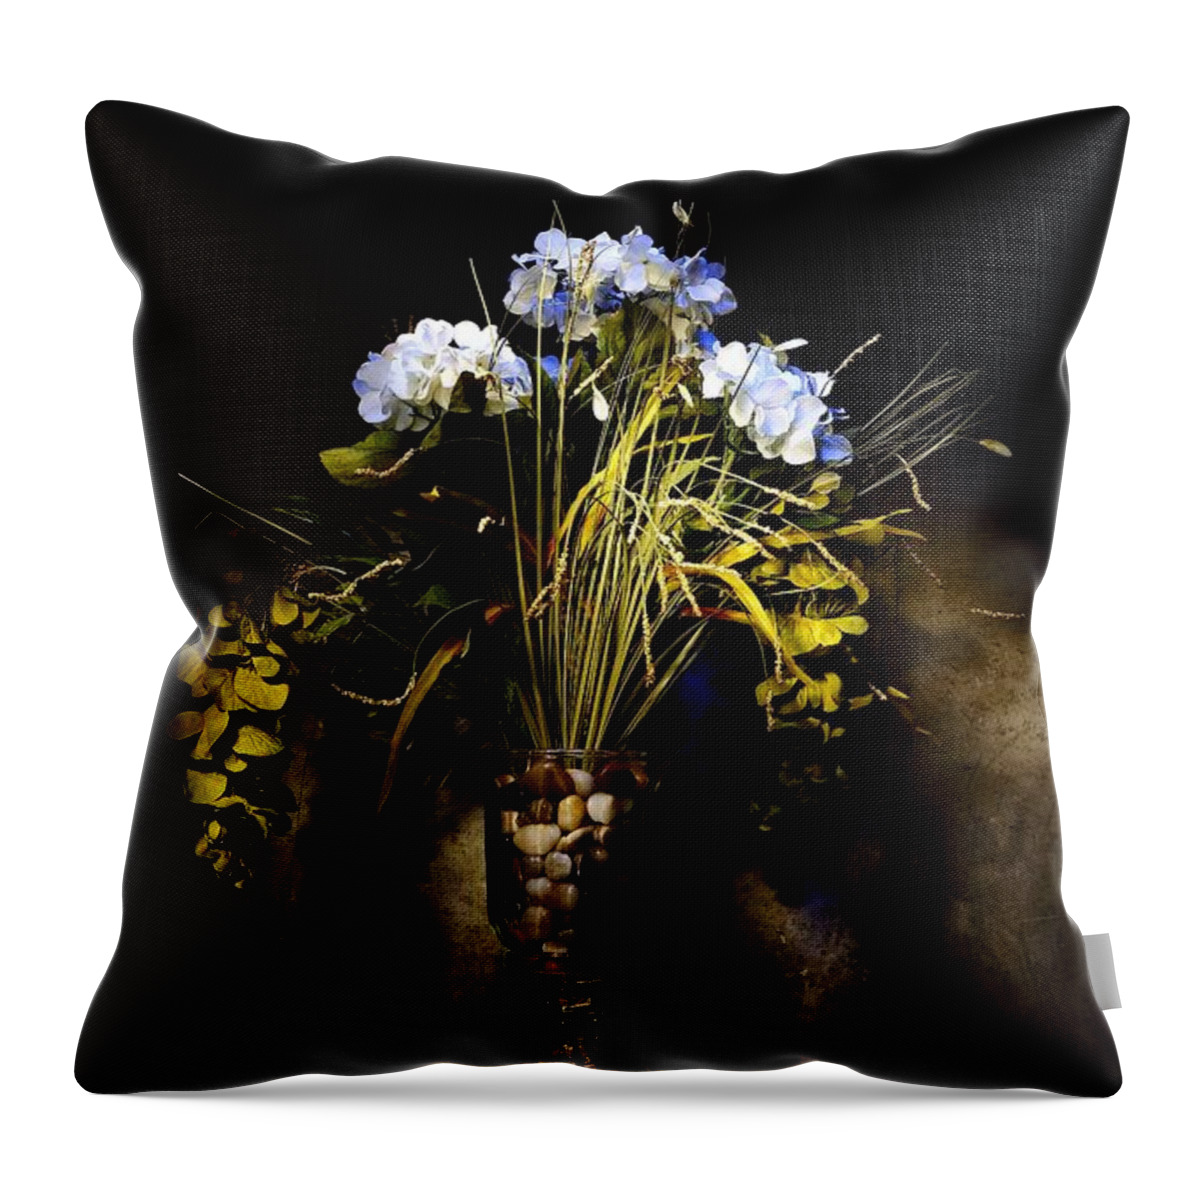 Floral Arrangement Throw Pillow featuring the photograph Floral Light Paint 3 by David Andersen